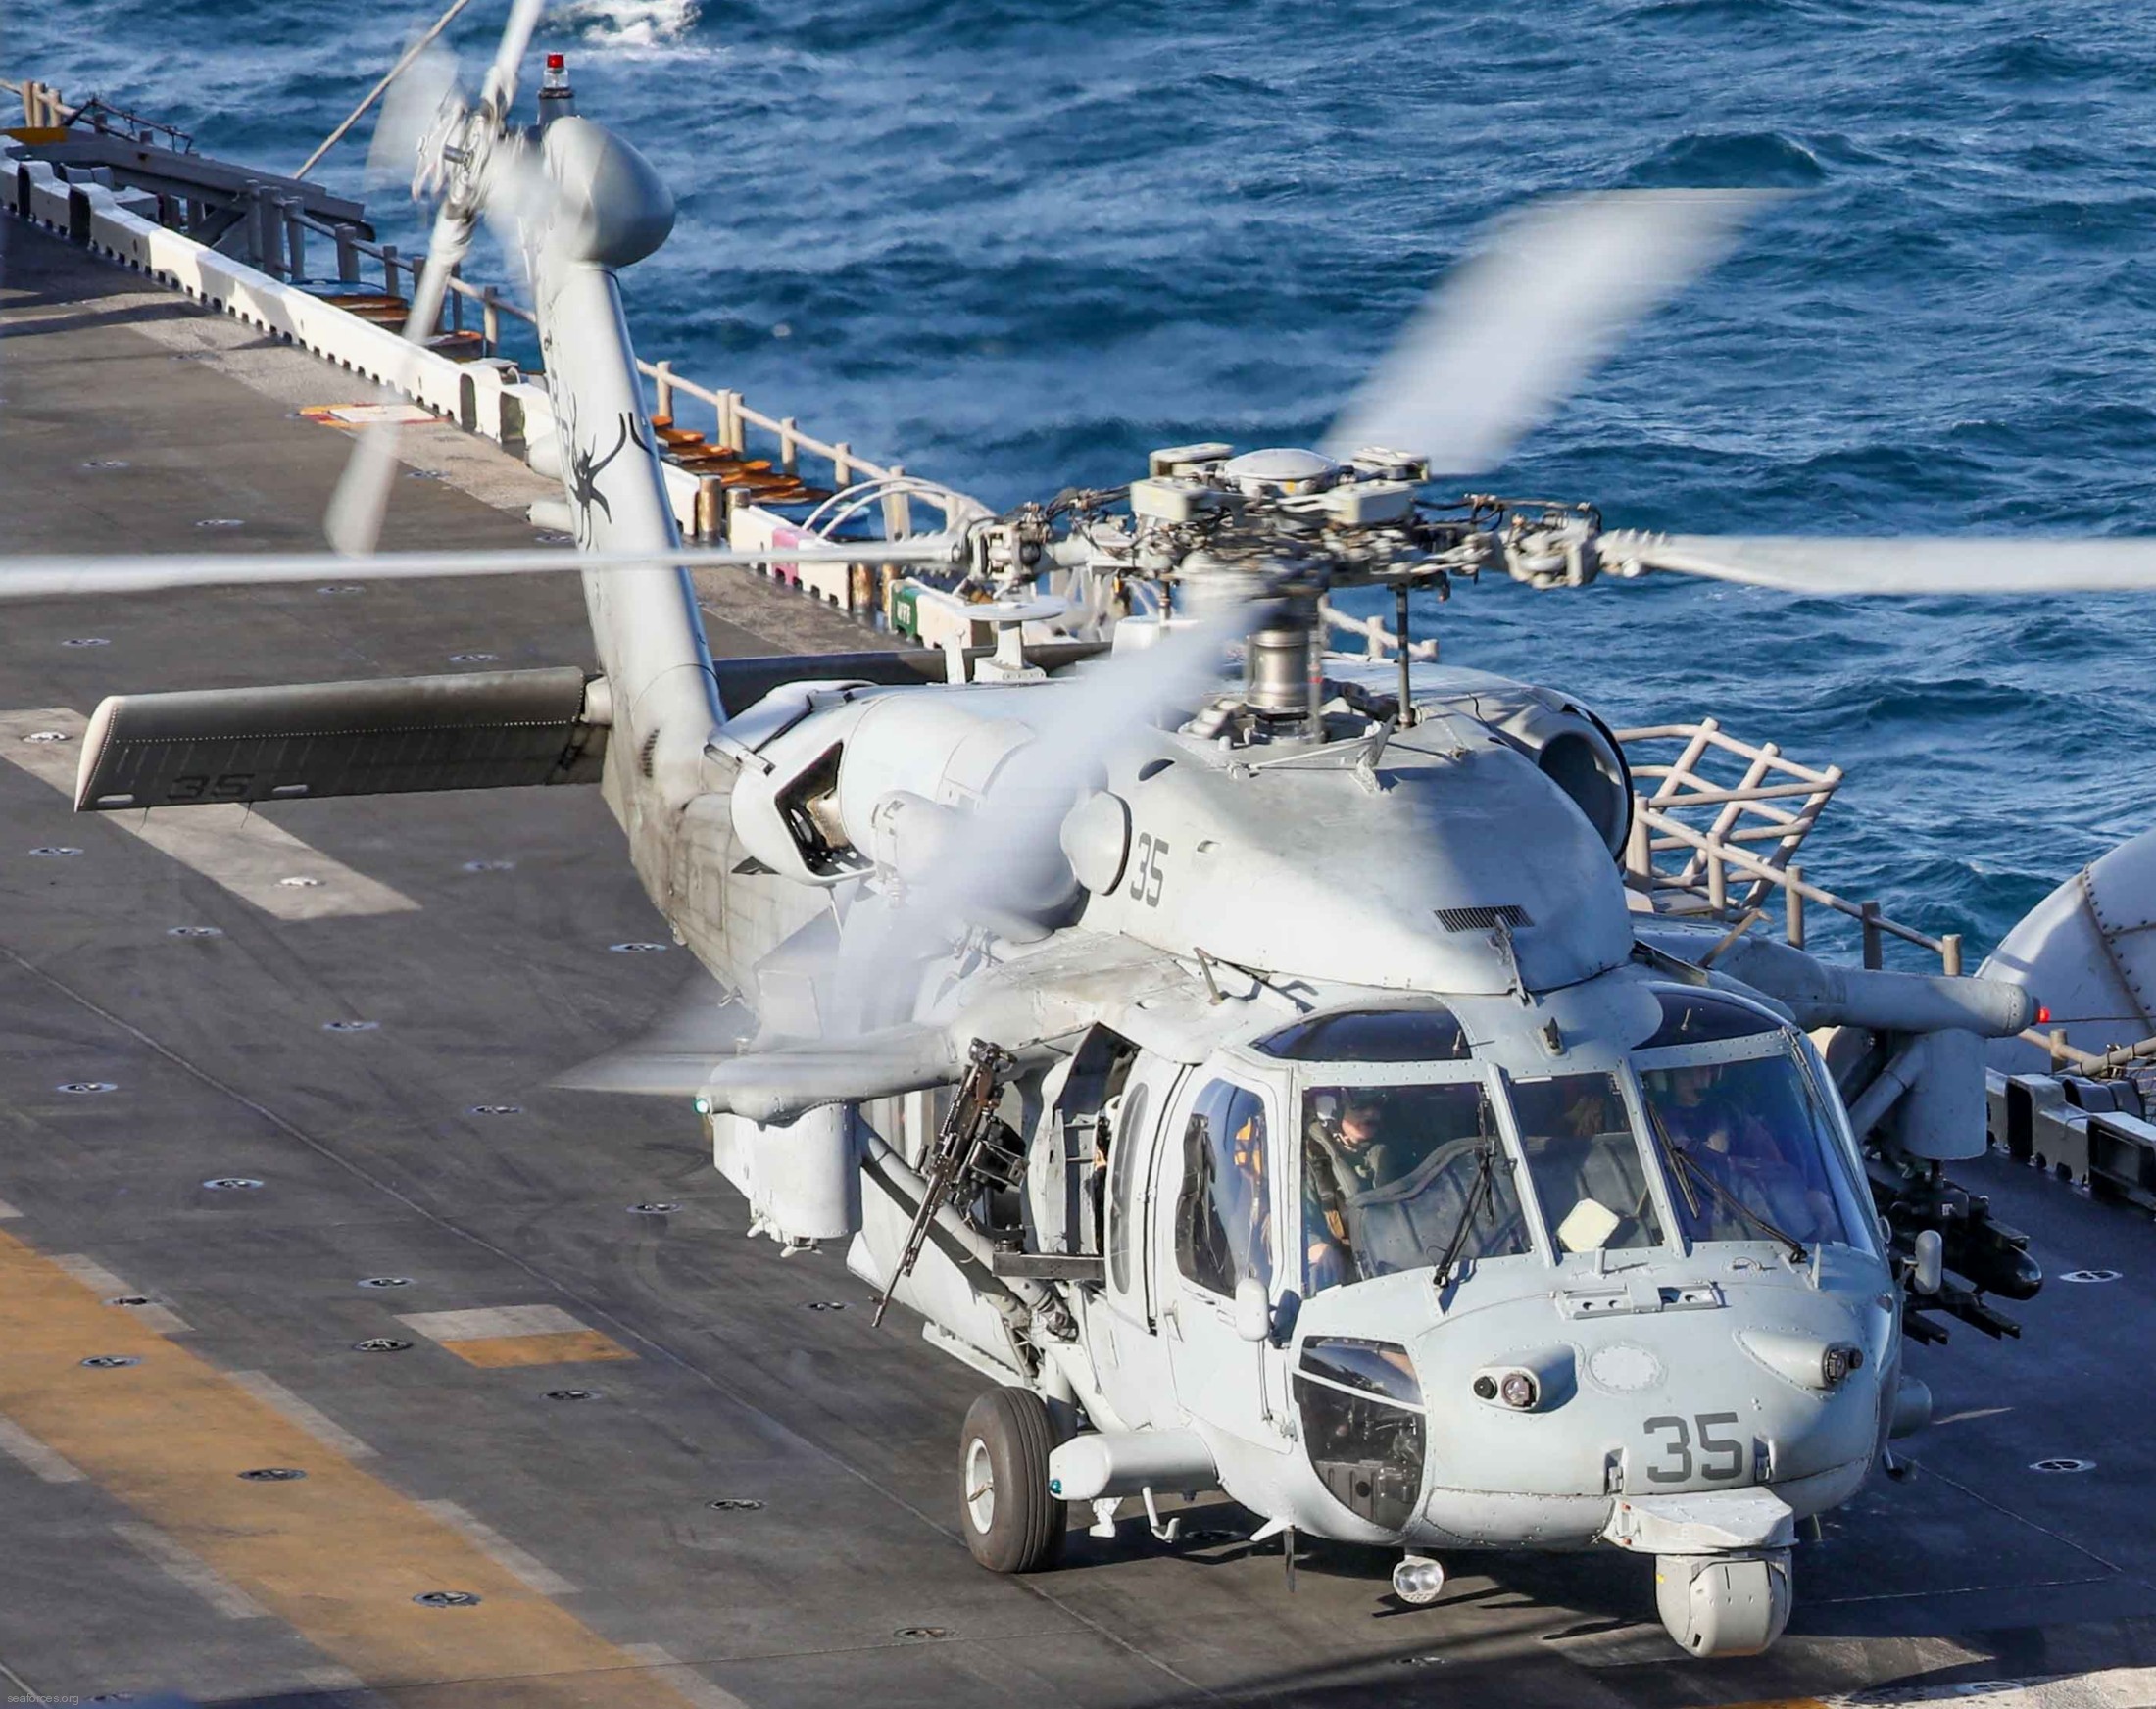 hsc-28 dragon whales helicopter sea combat squadron mh-60s seahawk us navy 104 lhd-5 uss bataan